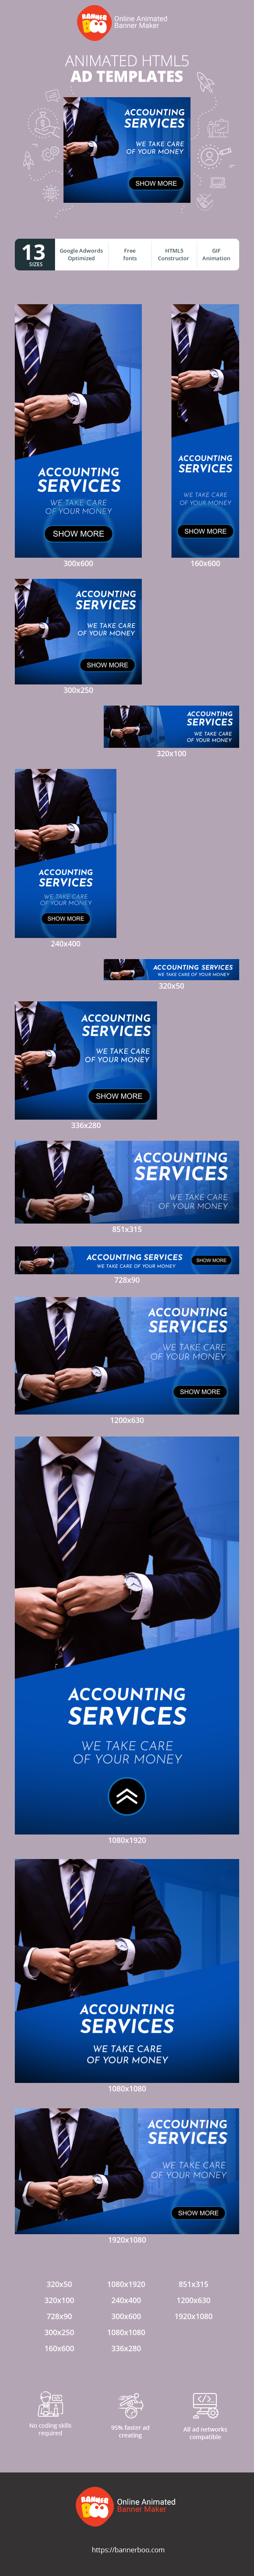 Banner ad template — Accounting Services — We Take Care Of Your Money